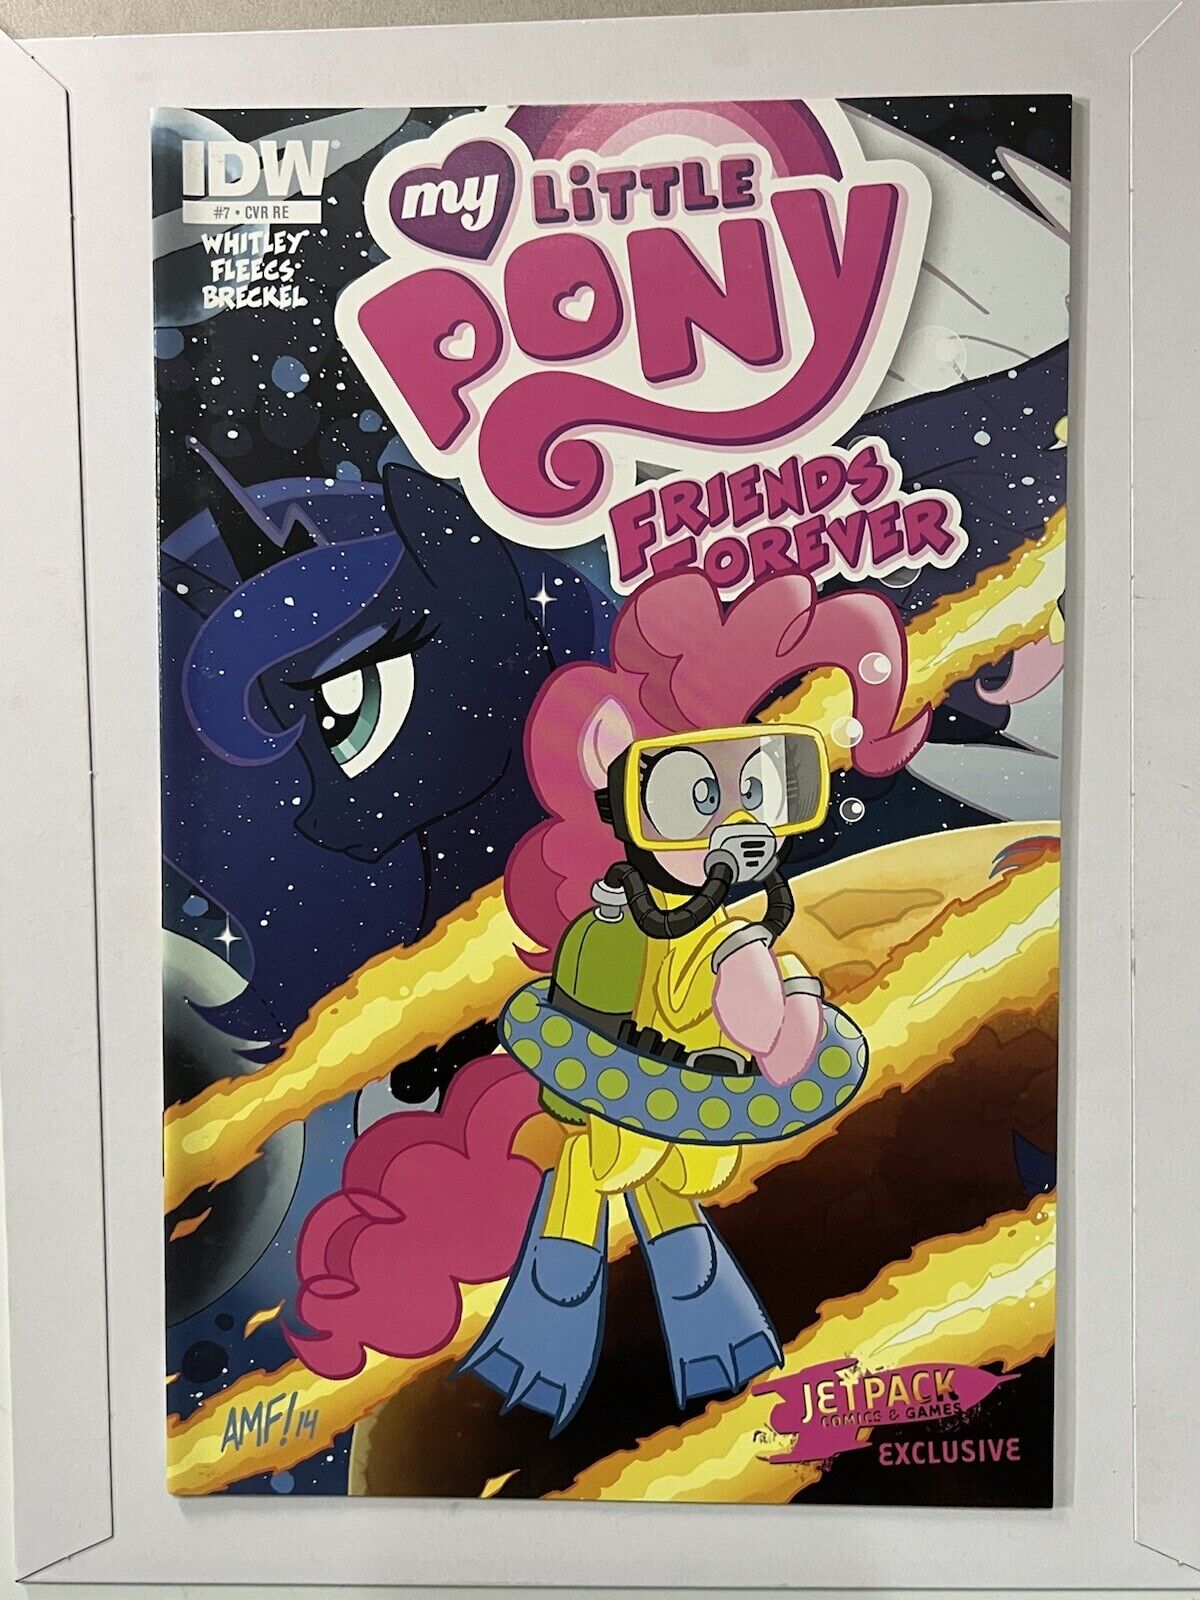 MY LITTLE PONY FRIENDS FOREVER #7 (JETPACK EXCLUSIVE) | Combined Shipping